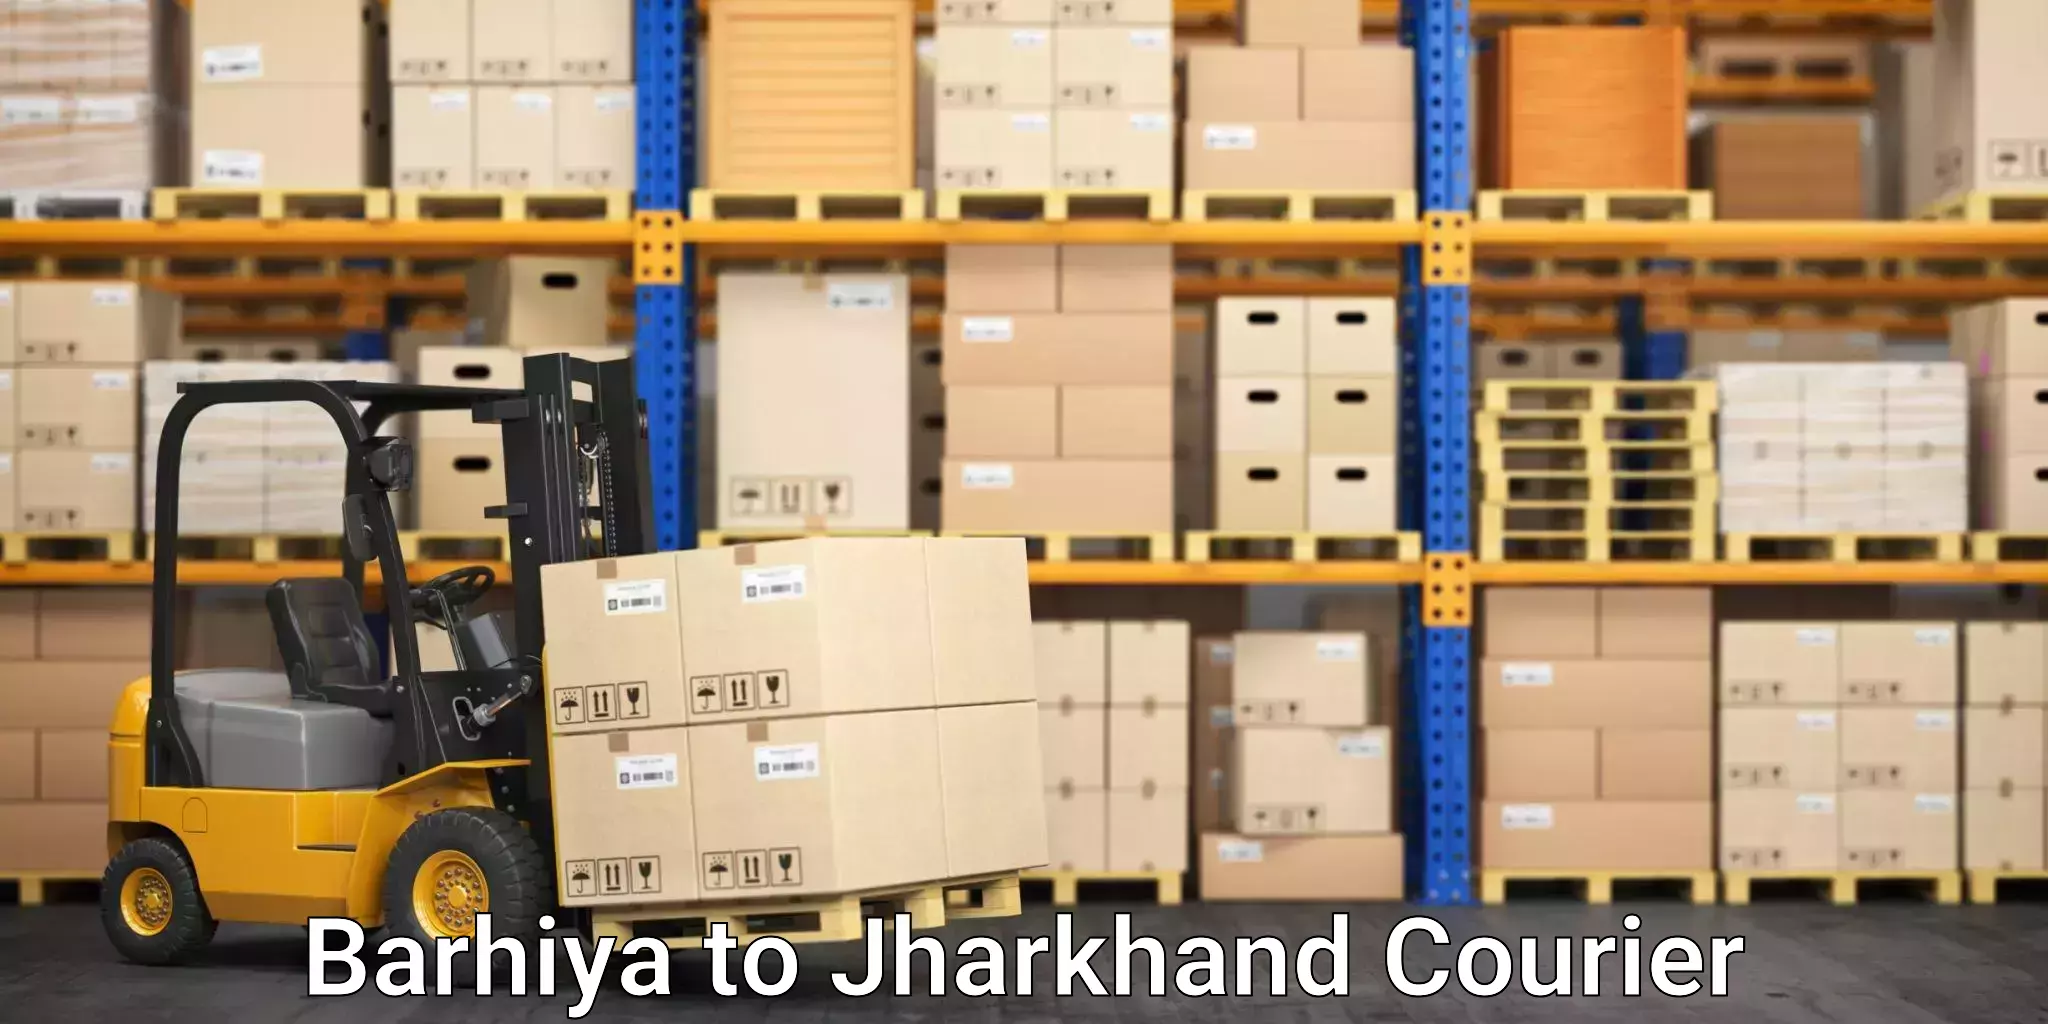 Furniture moving experts in Barhiya to Jharkhand